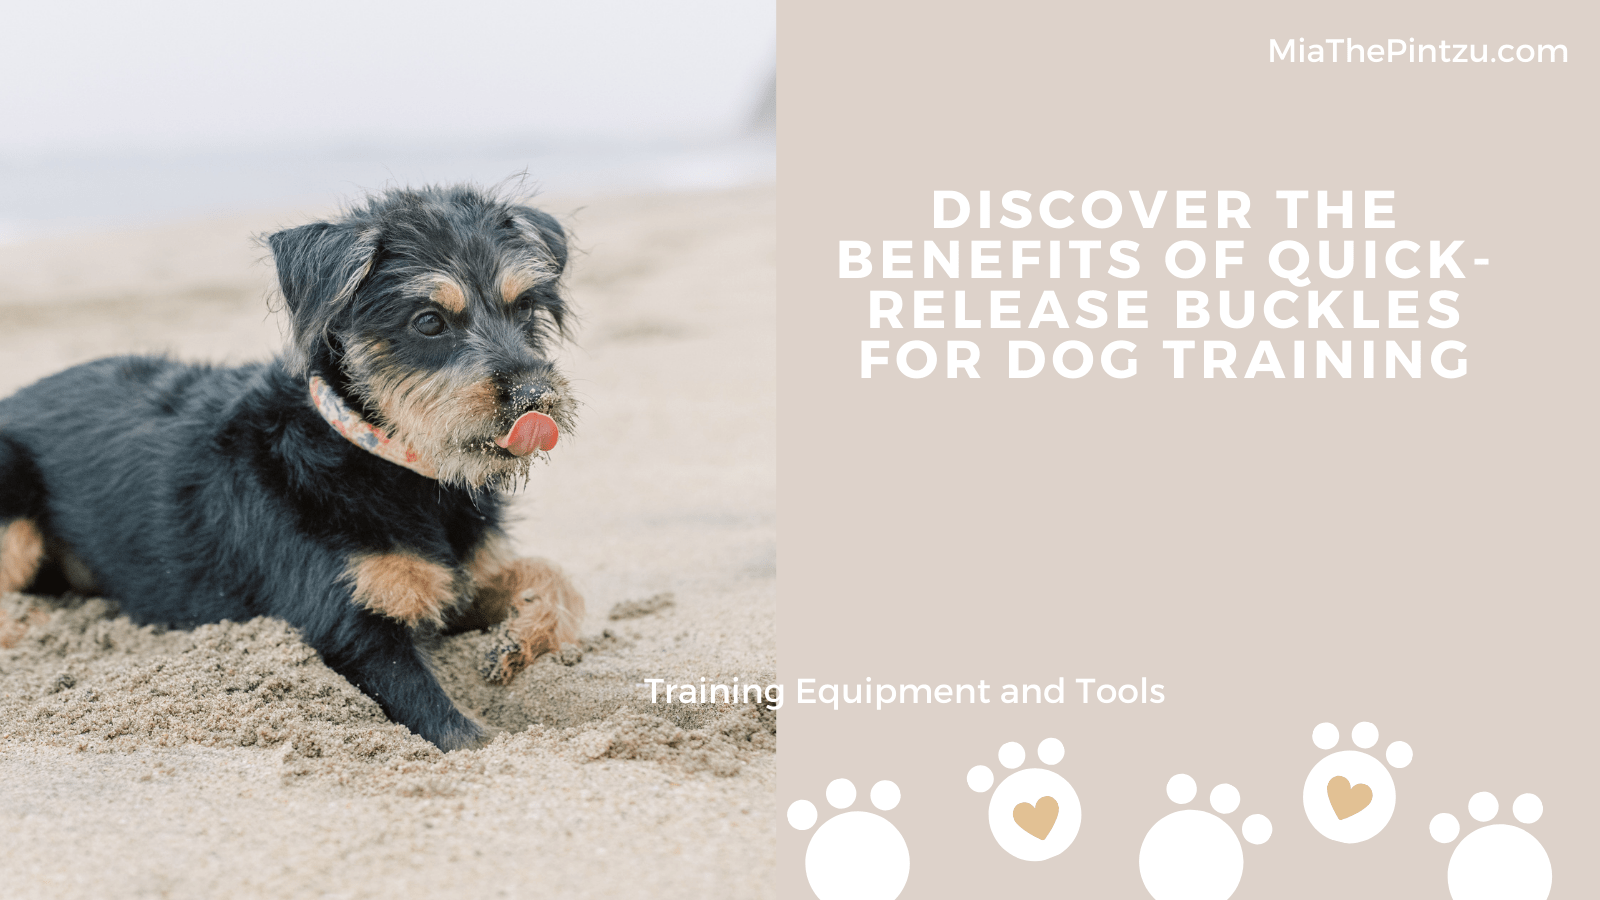 Discover the Benefits of Quick-Release Buckles for Dog Training